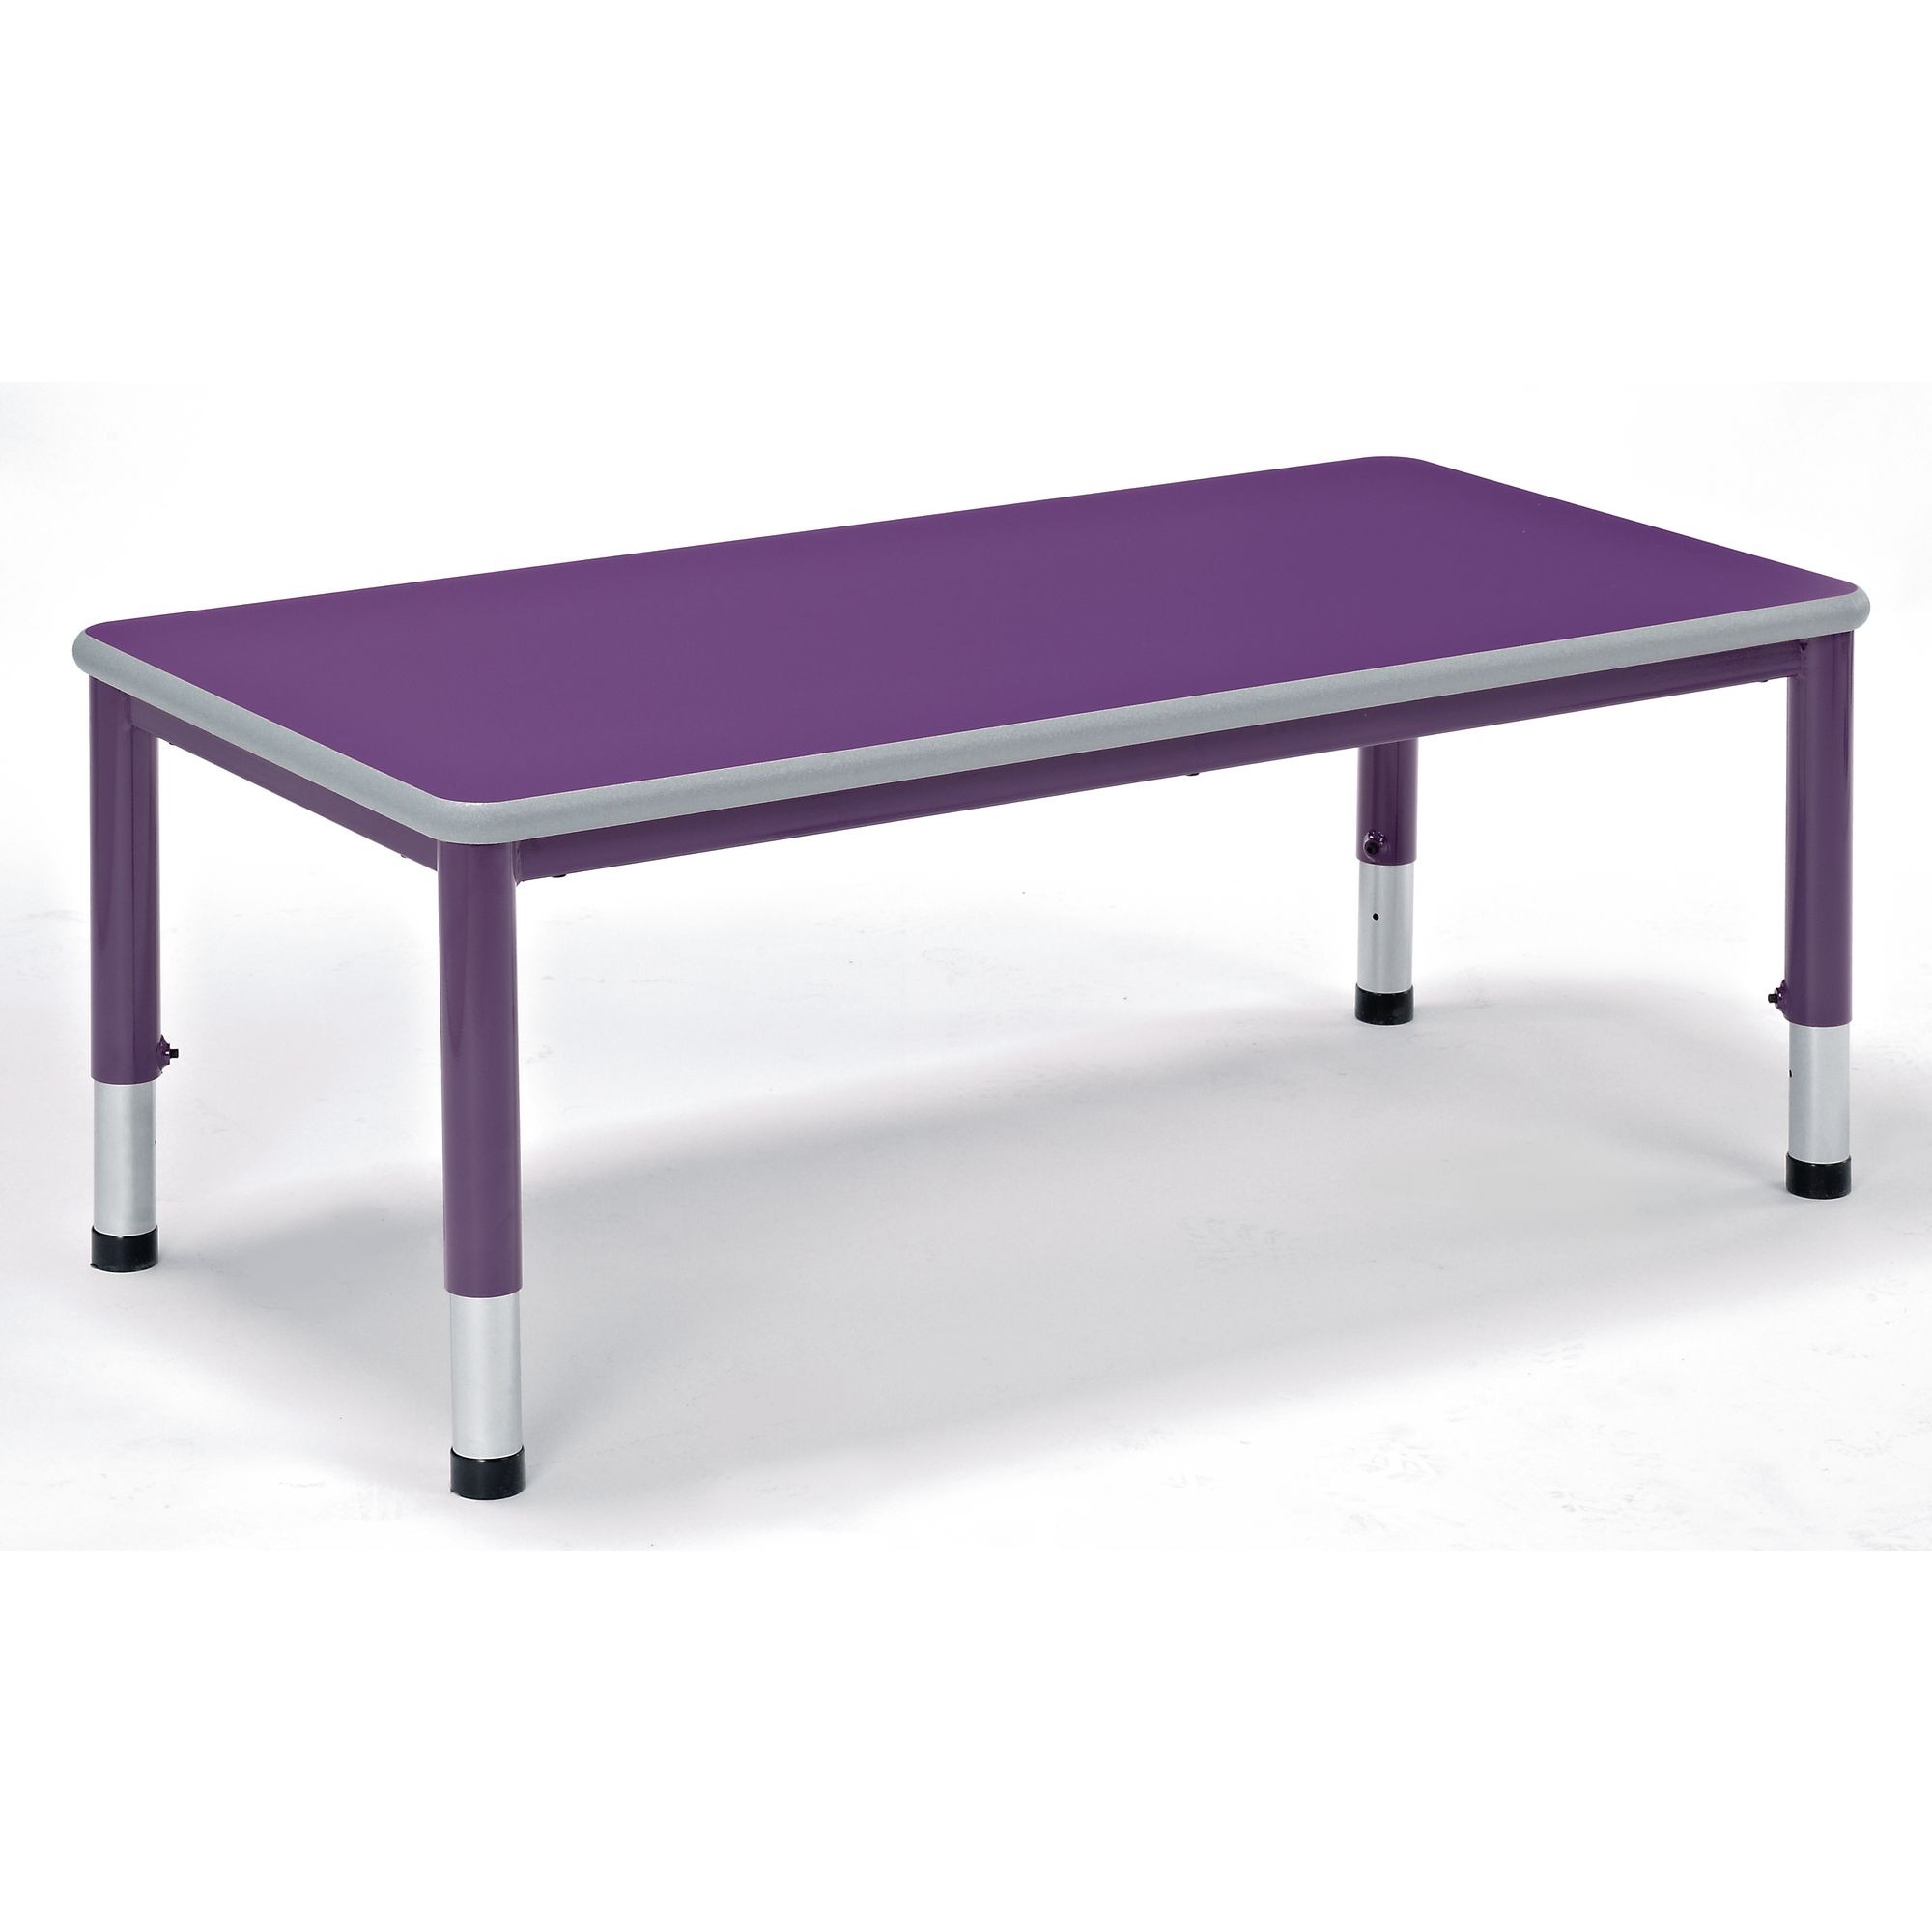 Harlequin Rectangular Height Adjustable Steel Classroom Table - 1200 x 600 x 600mm - Tangy Lime